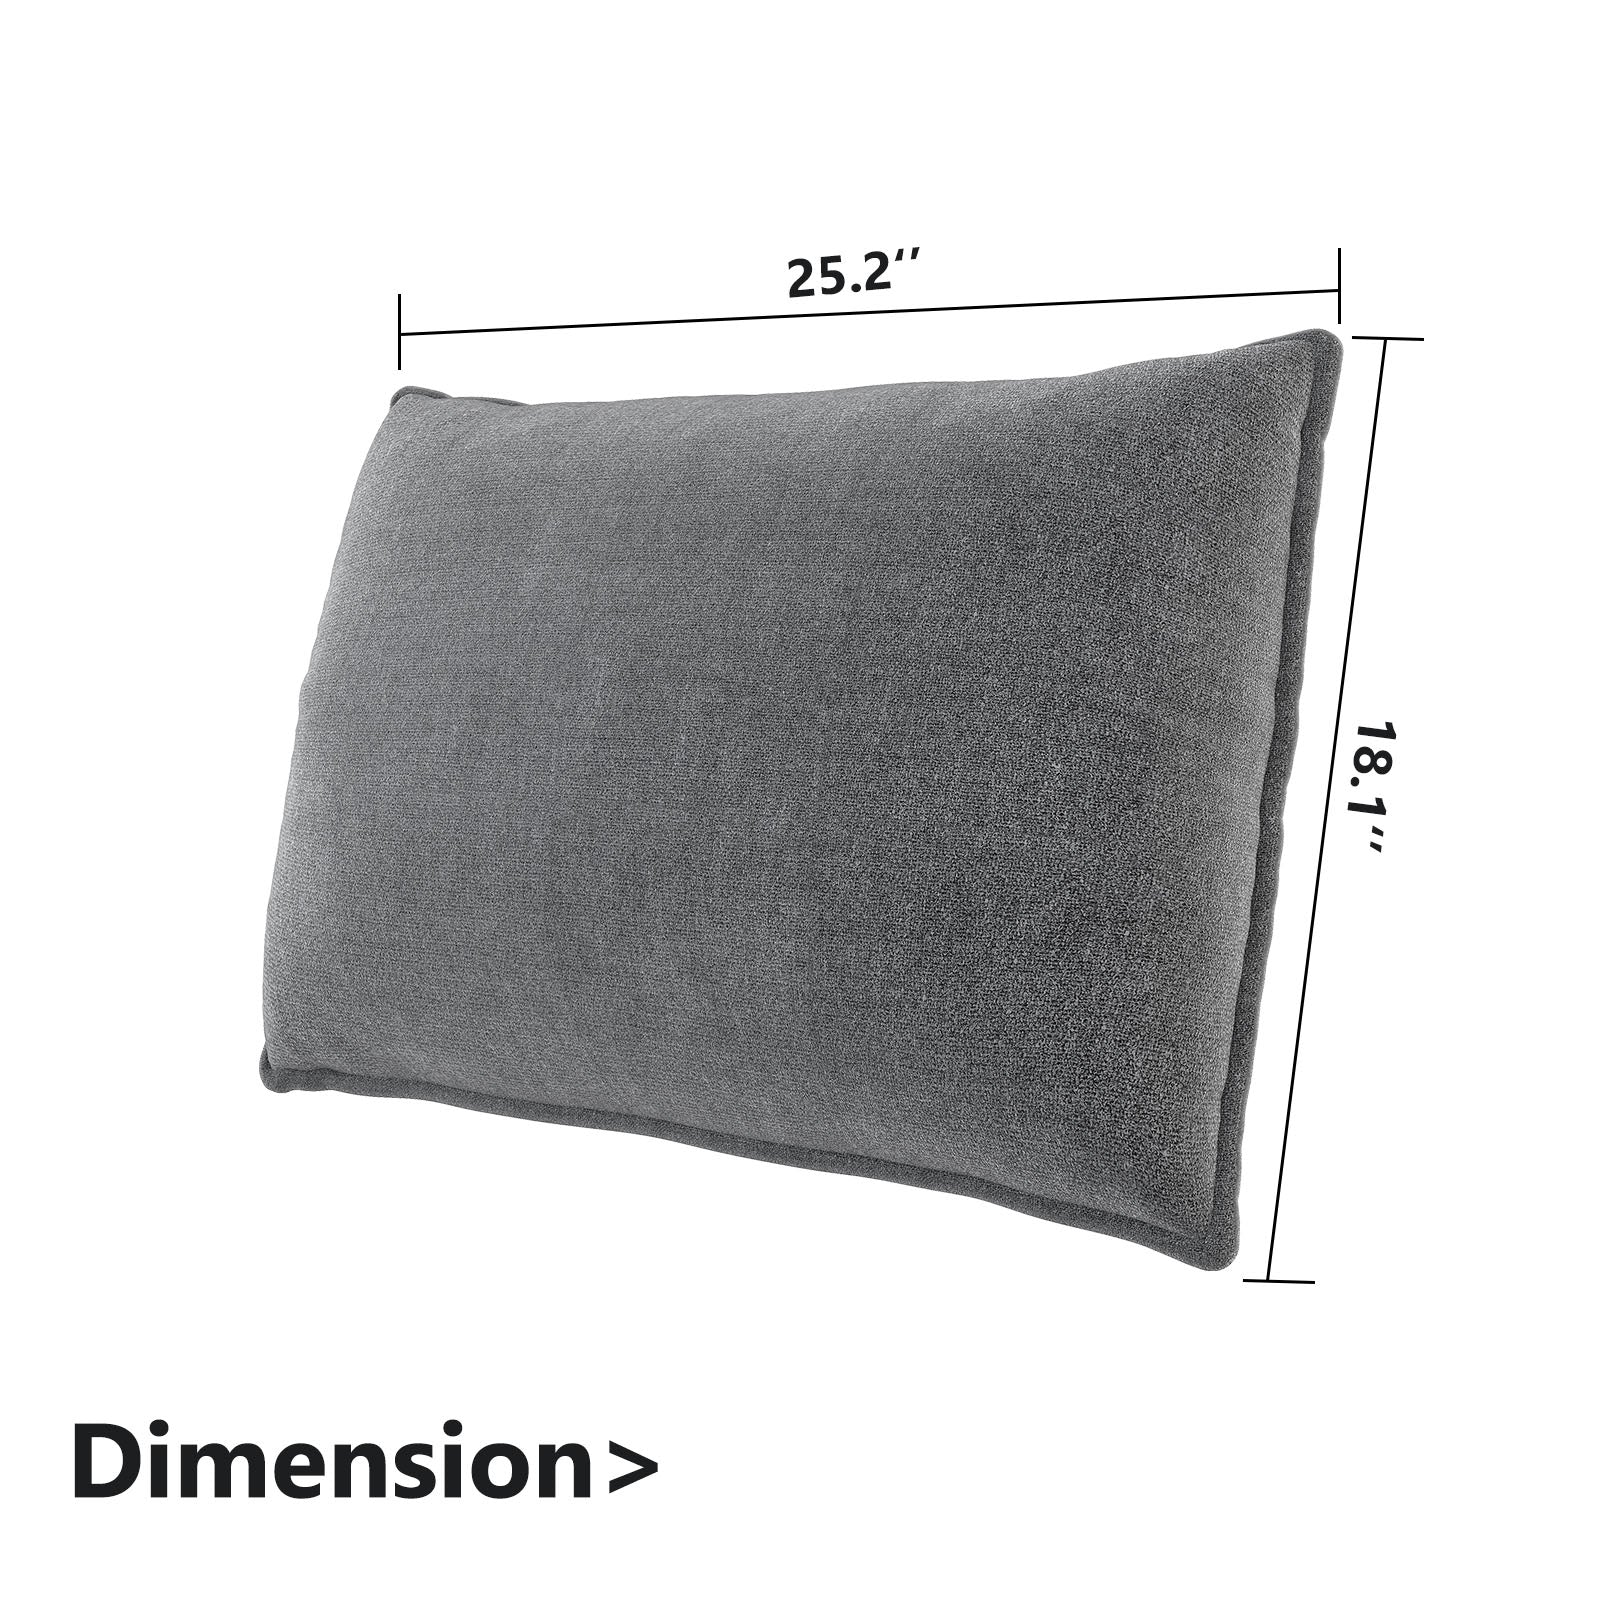 HONBAY Comfy Back Cushion Pillow with Removable Cover for Modular Sofa